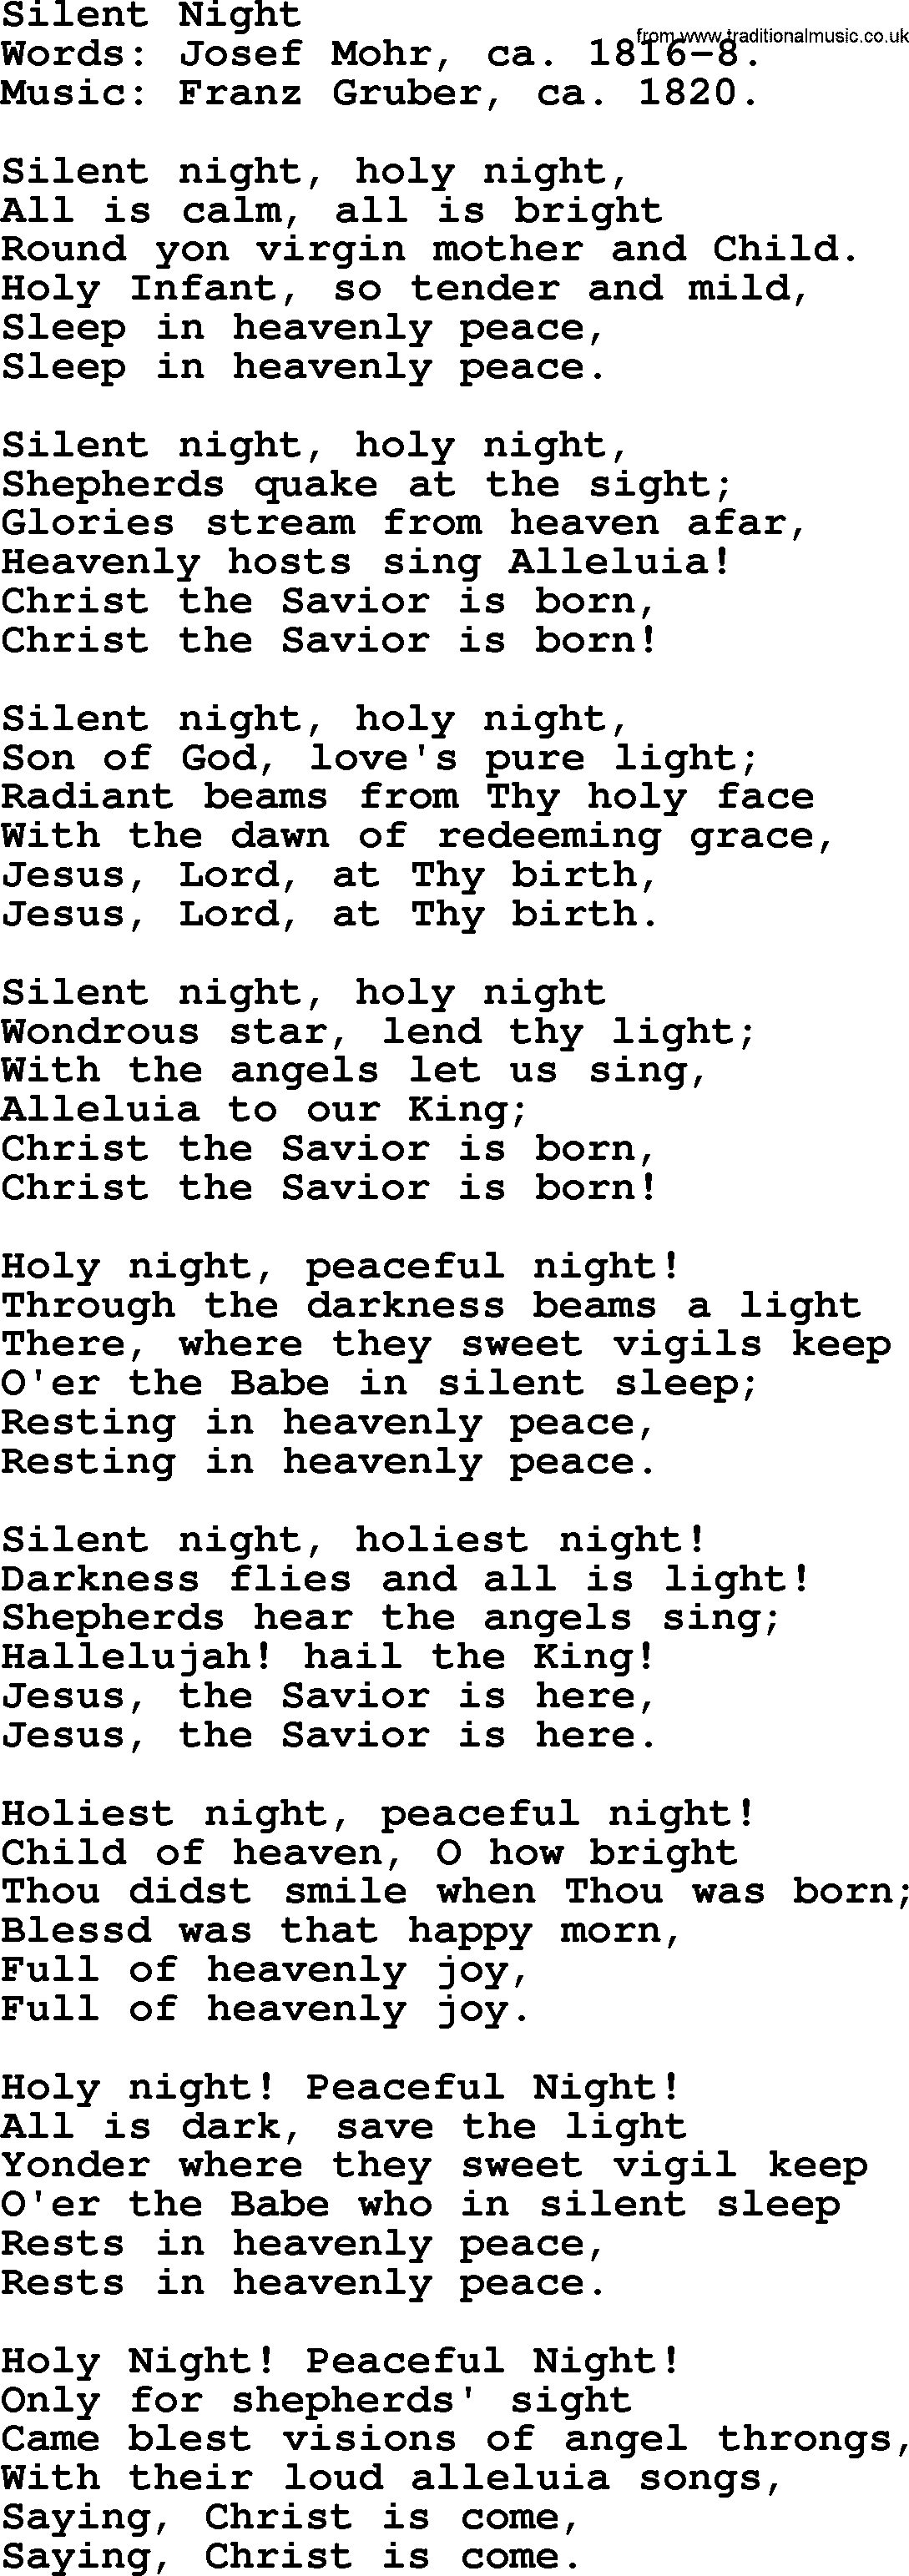 Christmas Hymns, Carols and Songs, title Silent Night complete